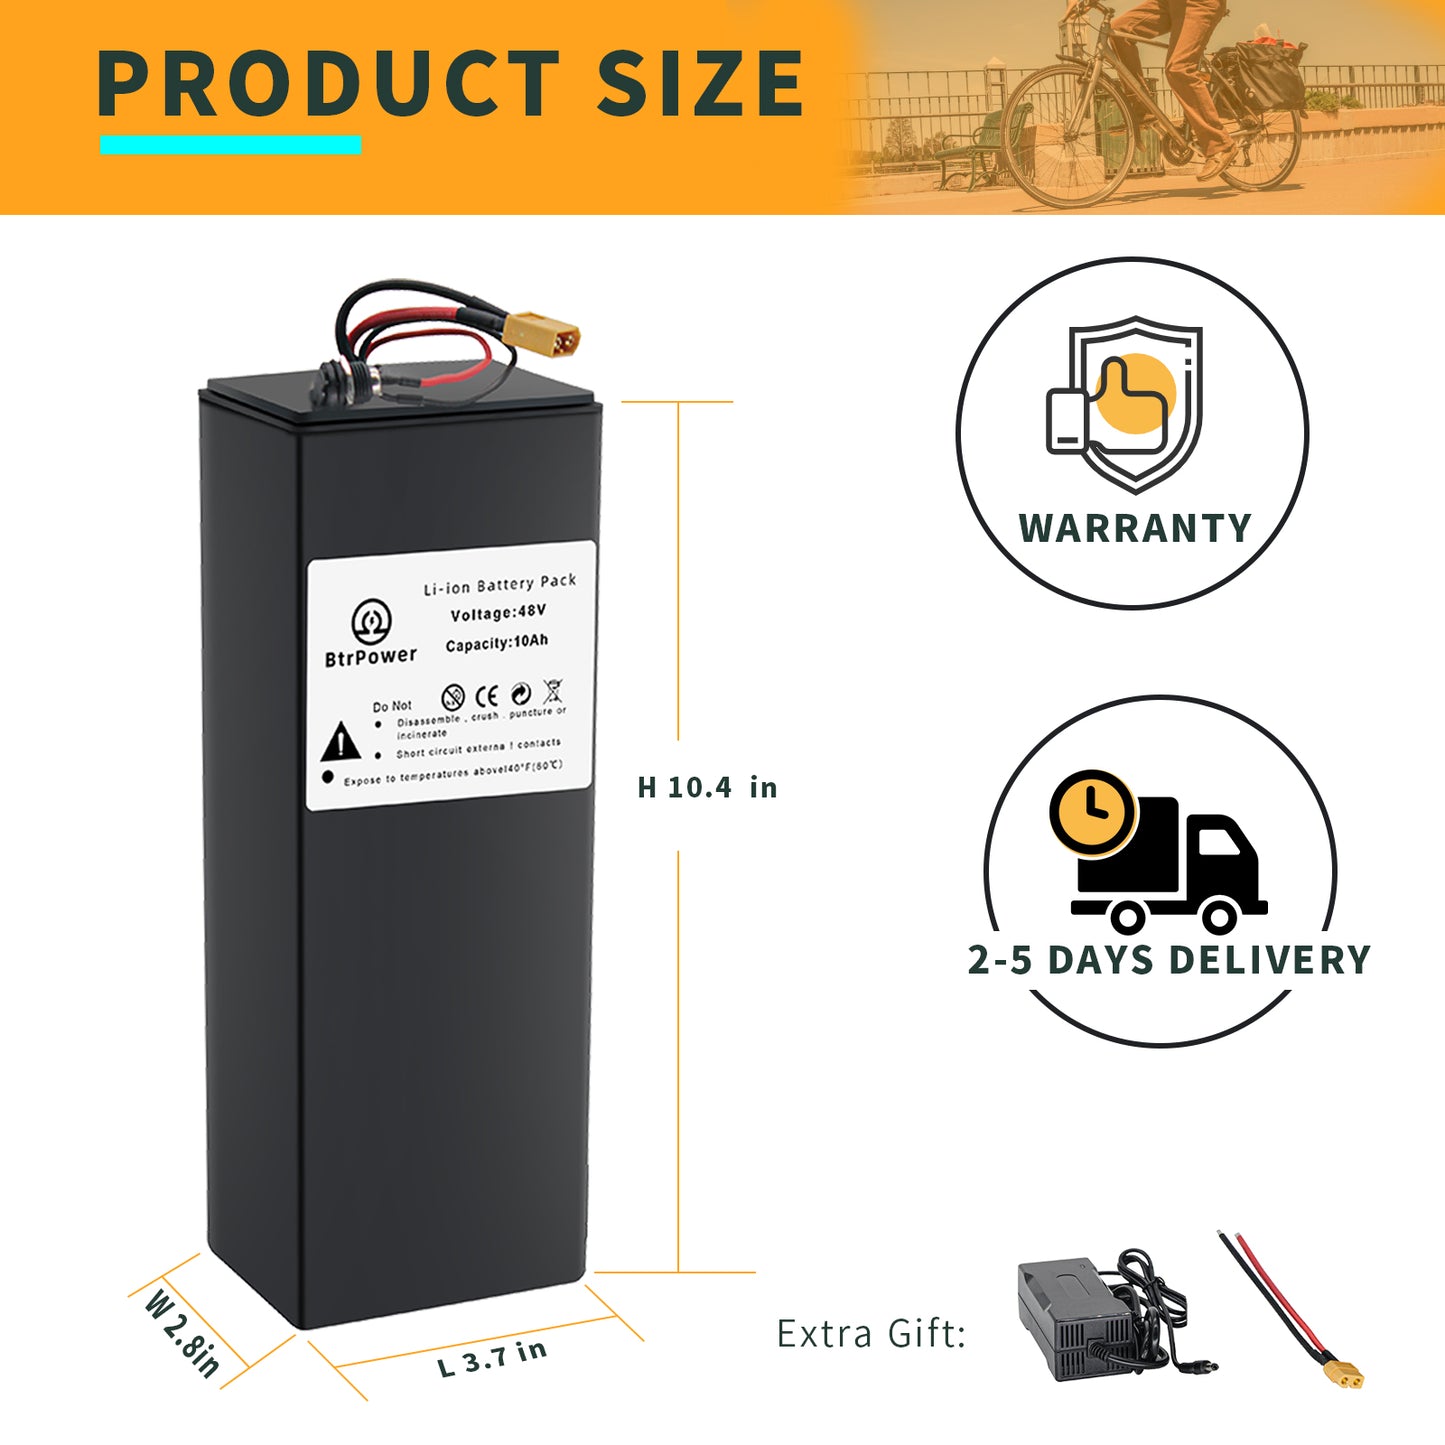 BtrPower Ebike Battery 48V 10AH, Li- ion Battery Pack with 3A Charger and  20A BMS